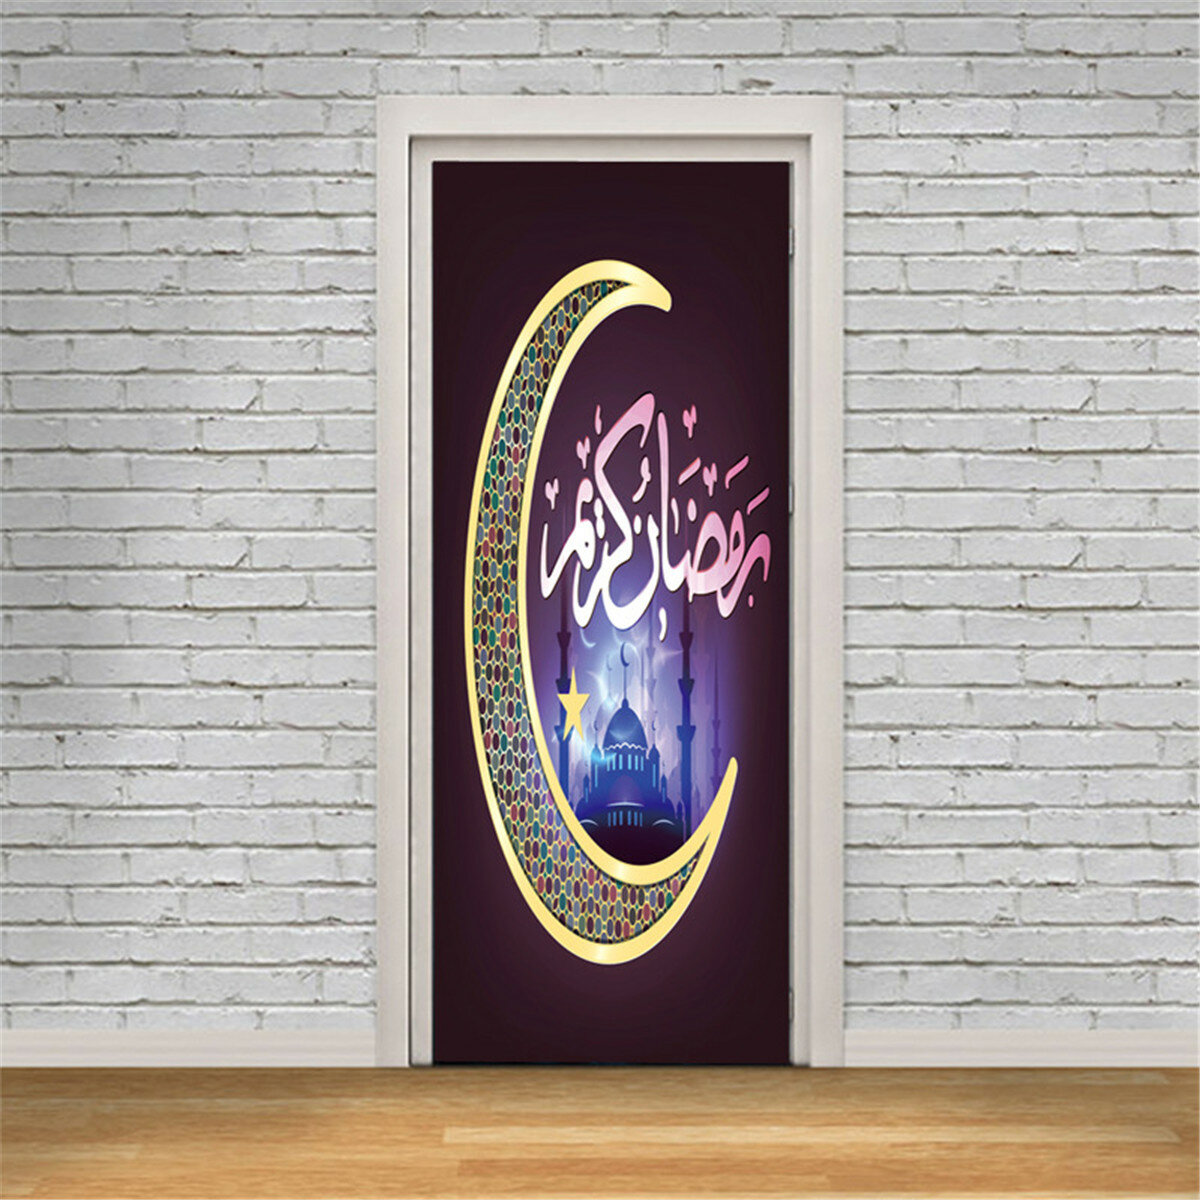 3D Islamic Wall Sticker Door Wall Paper Removable Wall Decal Office Home Living Room Bedroom Decorat